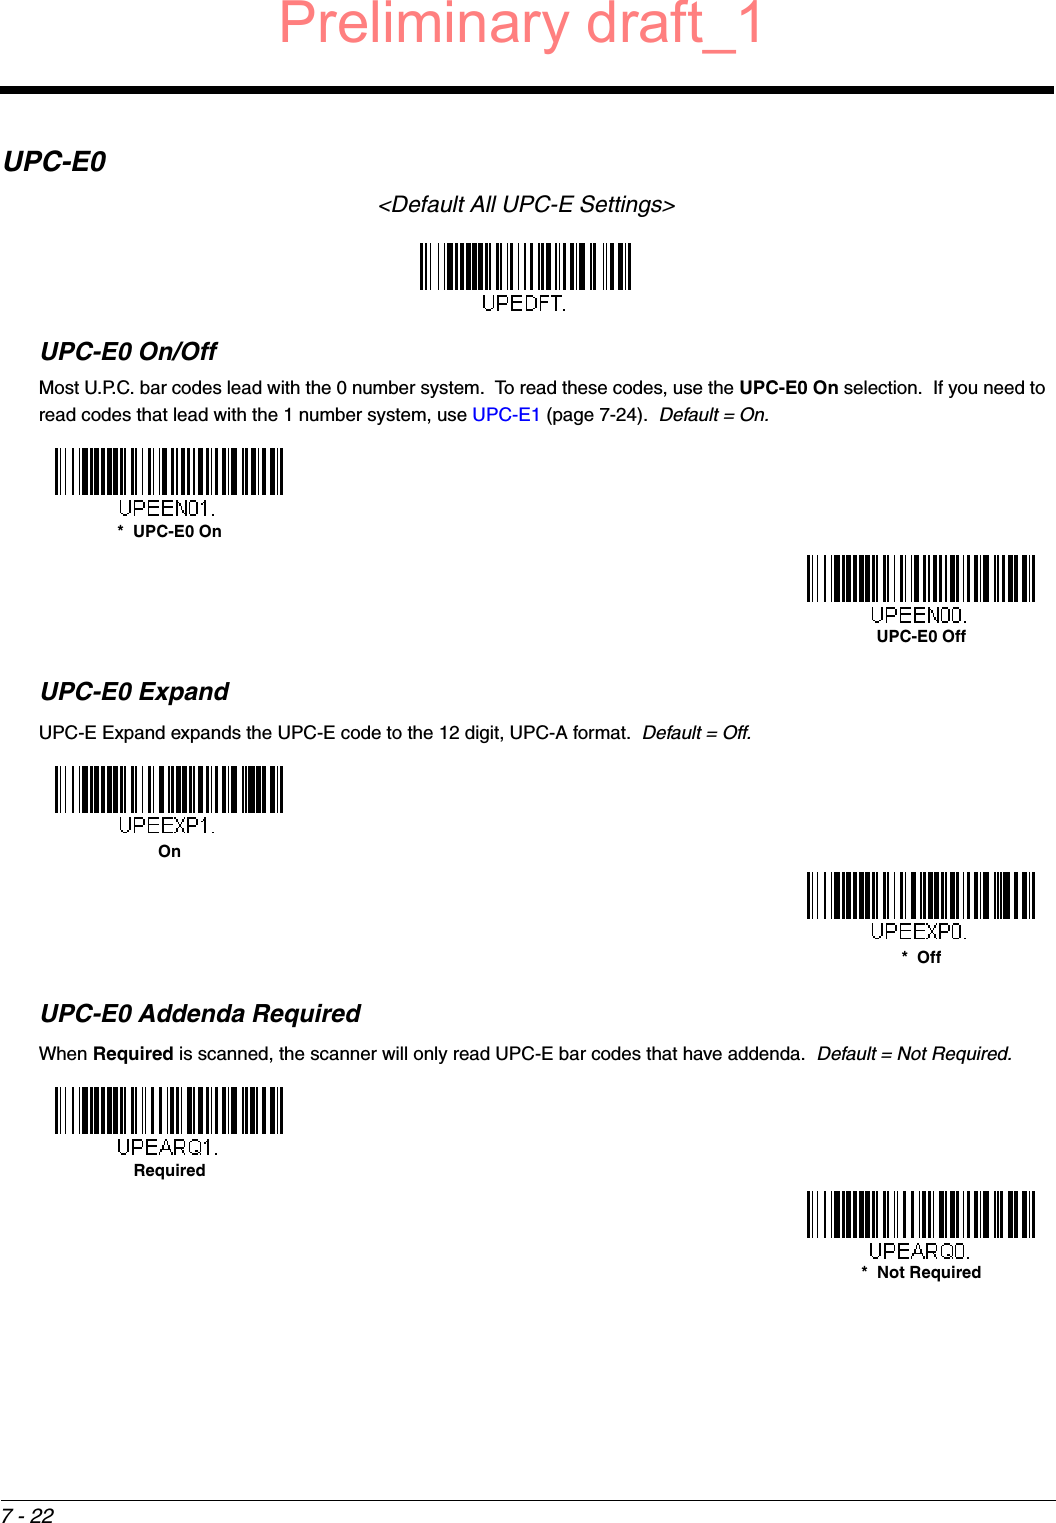 7 - 22UPC-E0&lt;Default All UPC-E Settings&gt;UPC-E0 On/OffMost U.P.C. bar codes lead with the 0 number system.  To read these codes, use the UPC-E0 On selection.  If you need to read codes that lead with the 1 number system, use UPC-E1 (page 7-24).  Default = On.UPC-E0 ExpandUPC-E Expand expands the UPC-E code to the 12 digit, UPC-A format.  Default = Off.UPC-E0 Addenda RequiredWhen Required is scanned, the scanner will only read UPC-E bar codes that have addenda.  Default = Not Required.*  UPC-E0 OnUPC-E0 OffOn*  OffRequired*  Not RequiredPreliminary draft_1